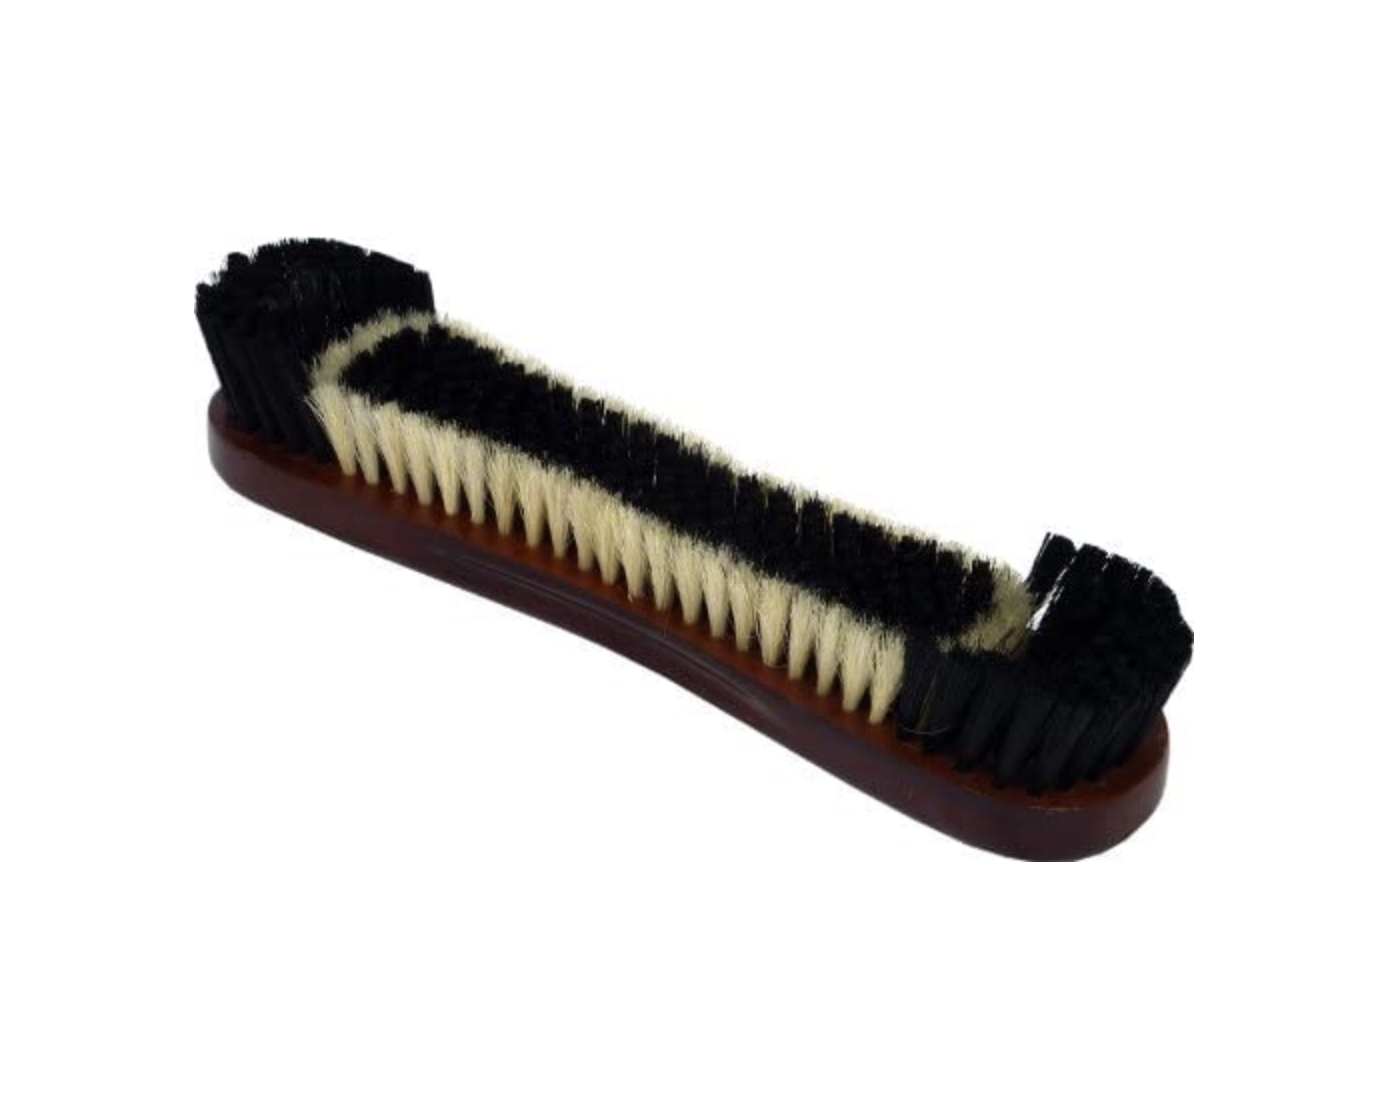 Snooker table brushes: the best options for under £20